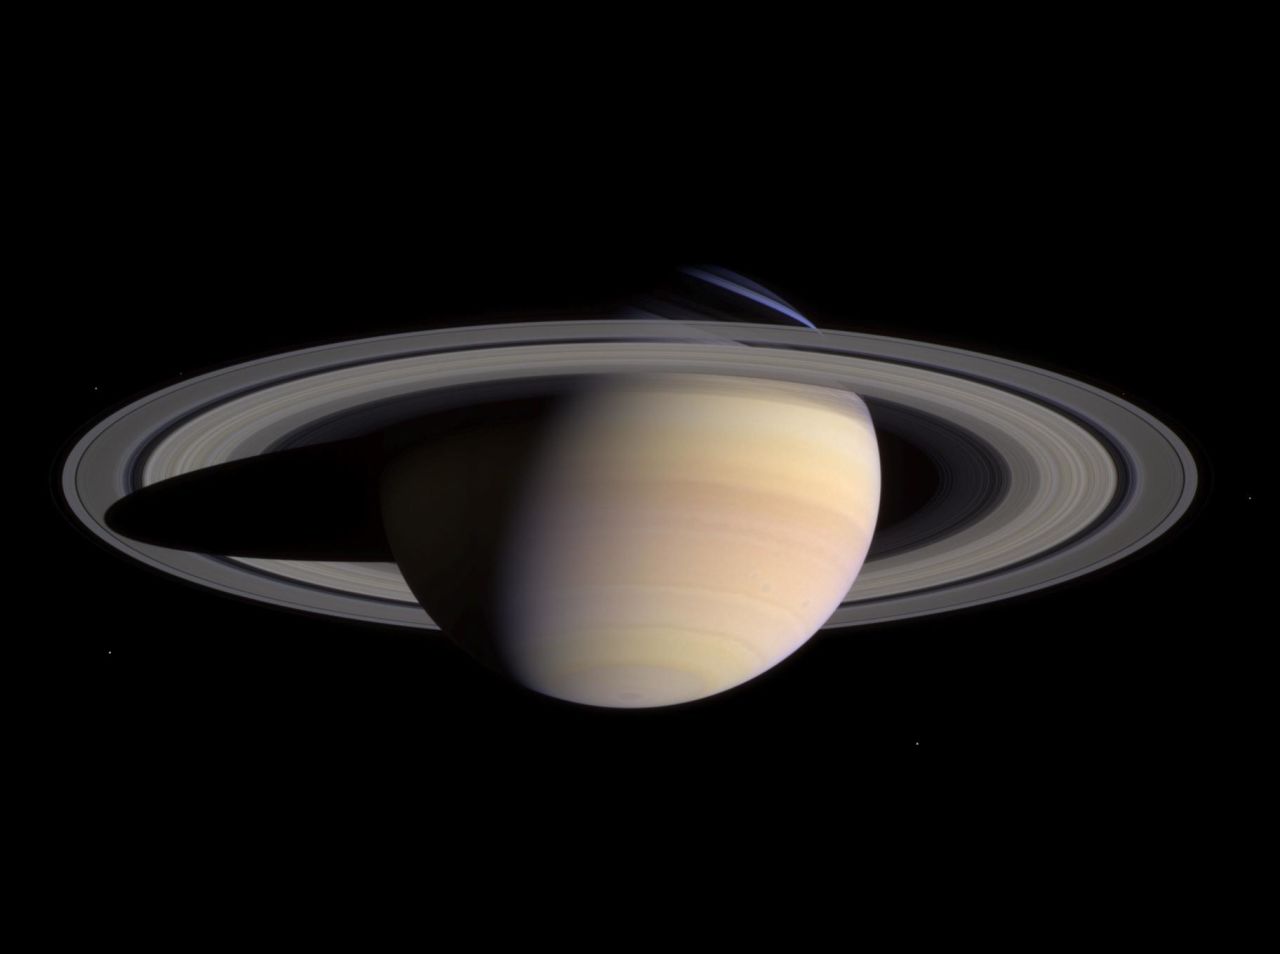 Saturn's pale colors and its rings come into view as Cassini approaches on May 7, 2004. This composite was made from images taken when Cassini was about 18 million miles (29 million kilometers) from Saturn. It also shows some of Saturn's moons.